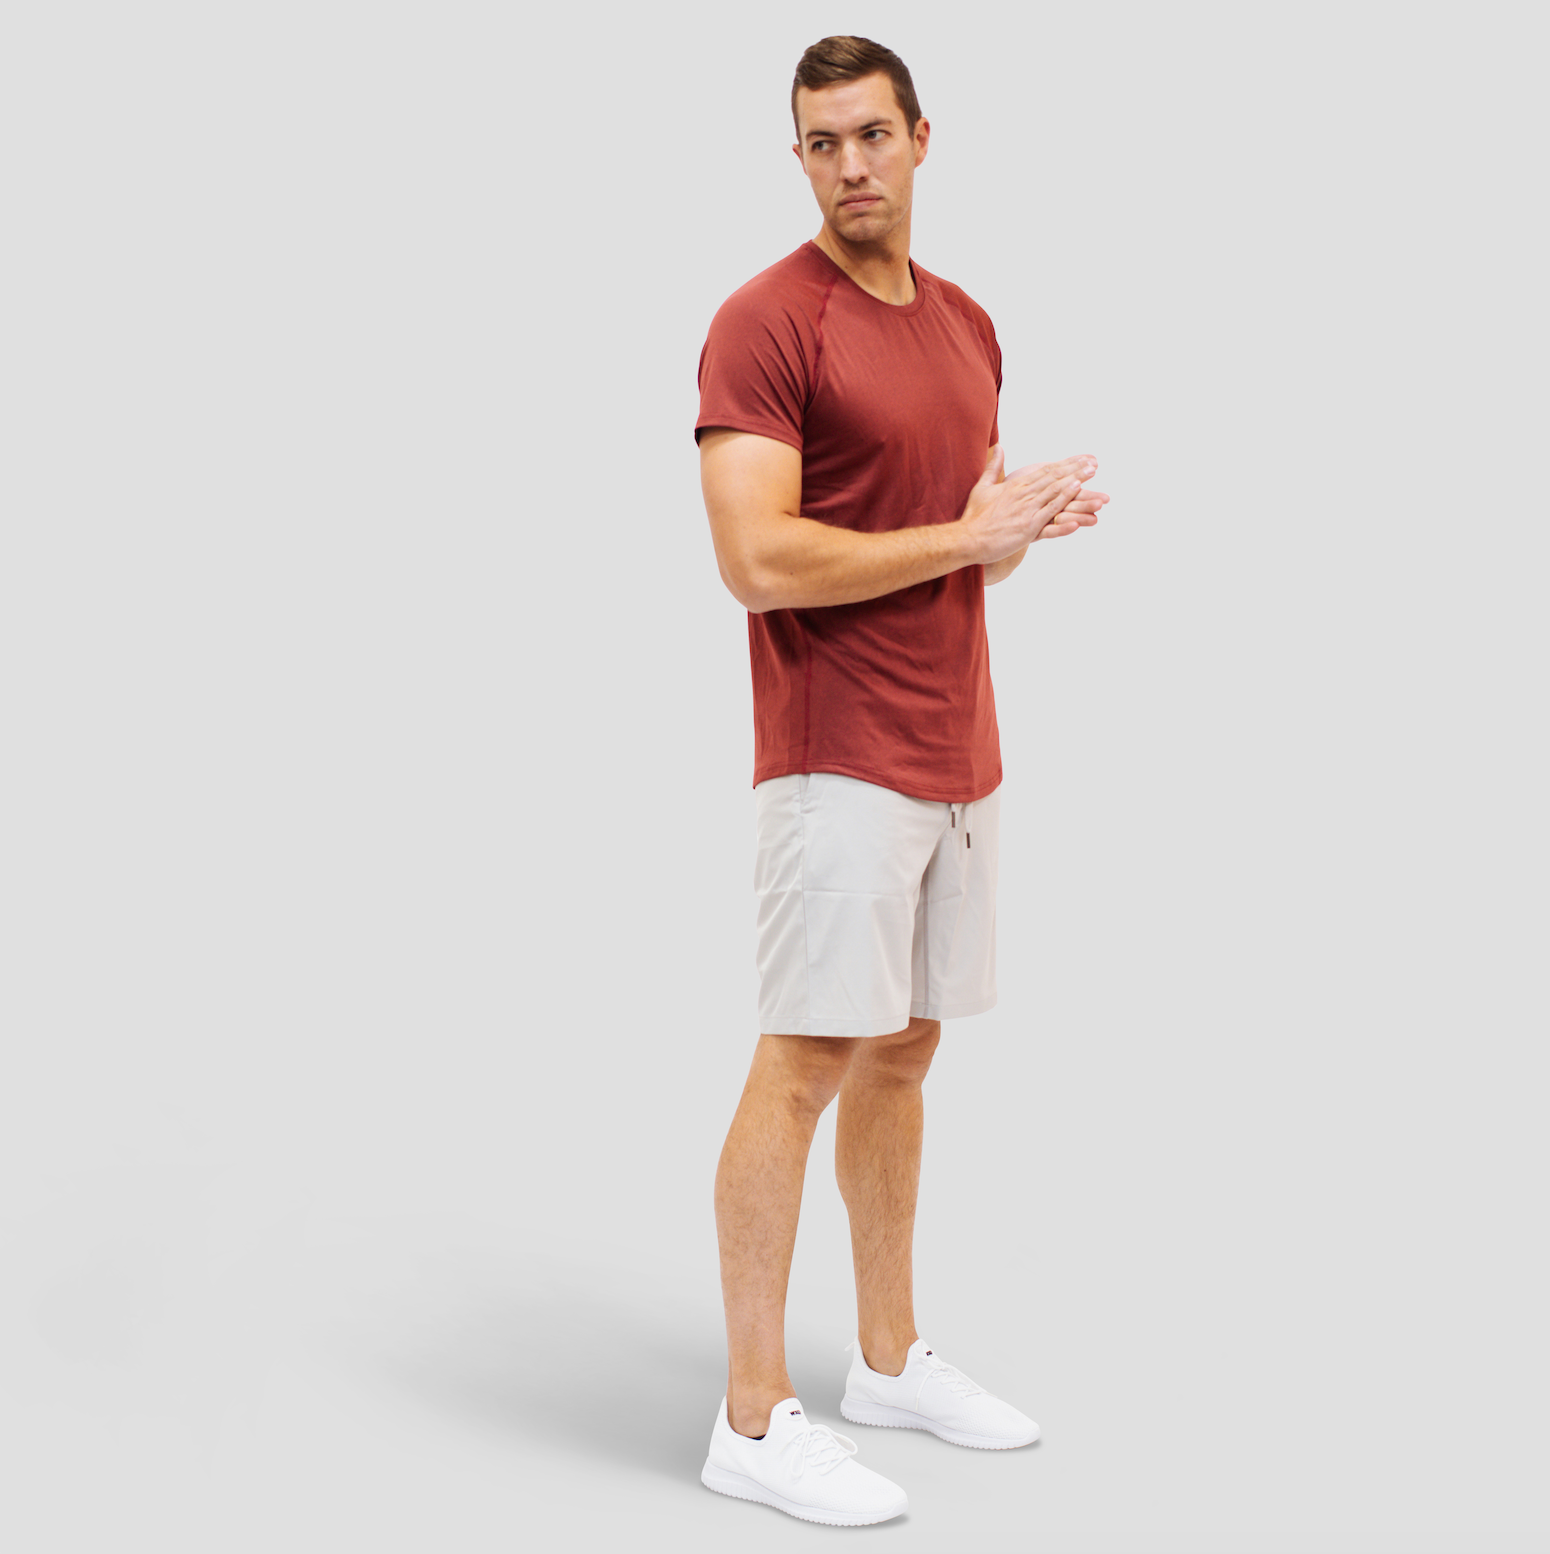 Tall Guy Wearing Tall Athletic Shorts